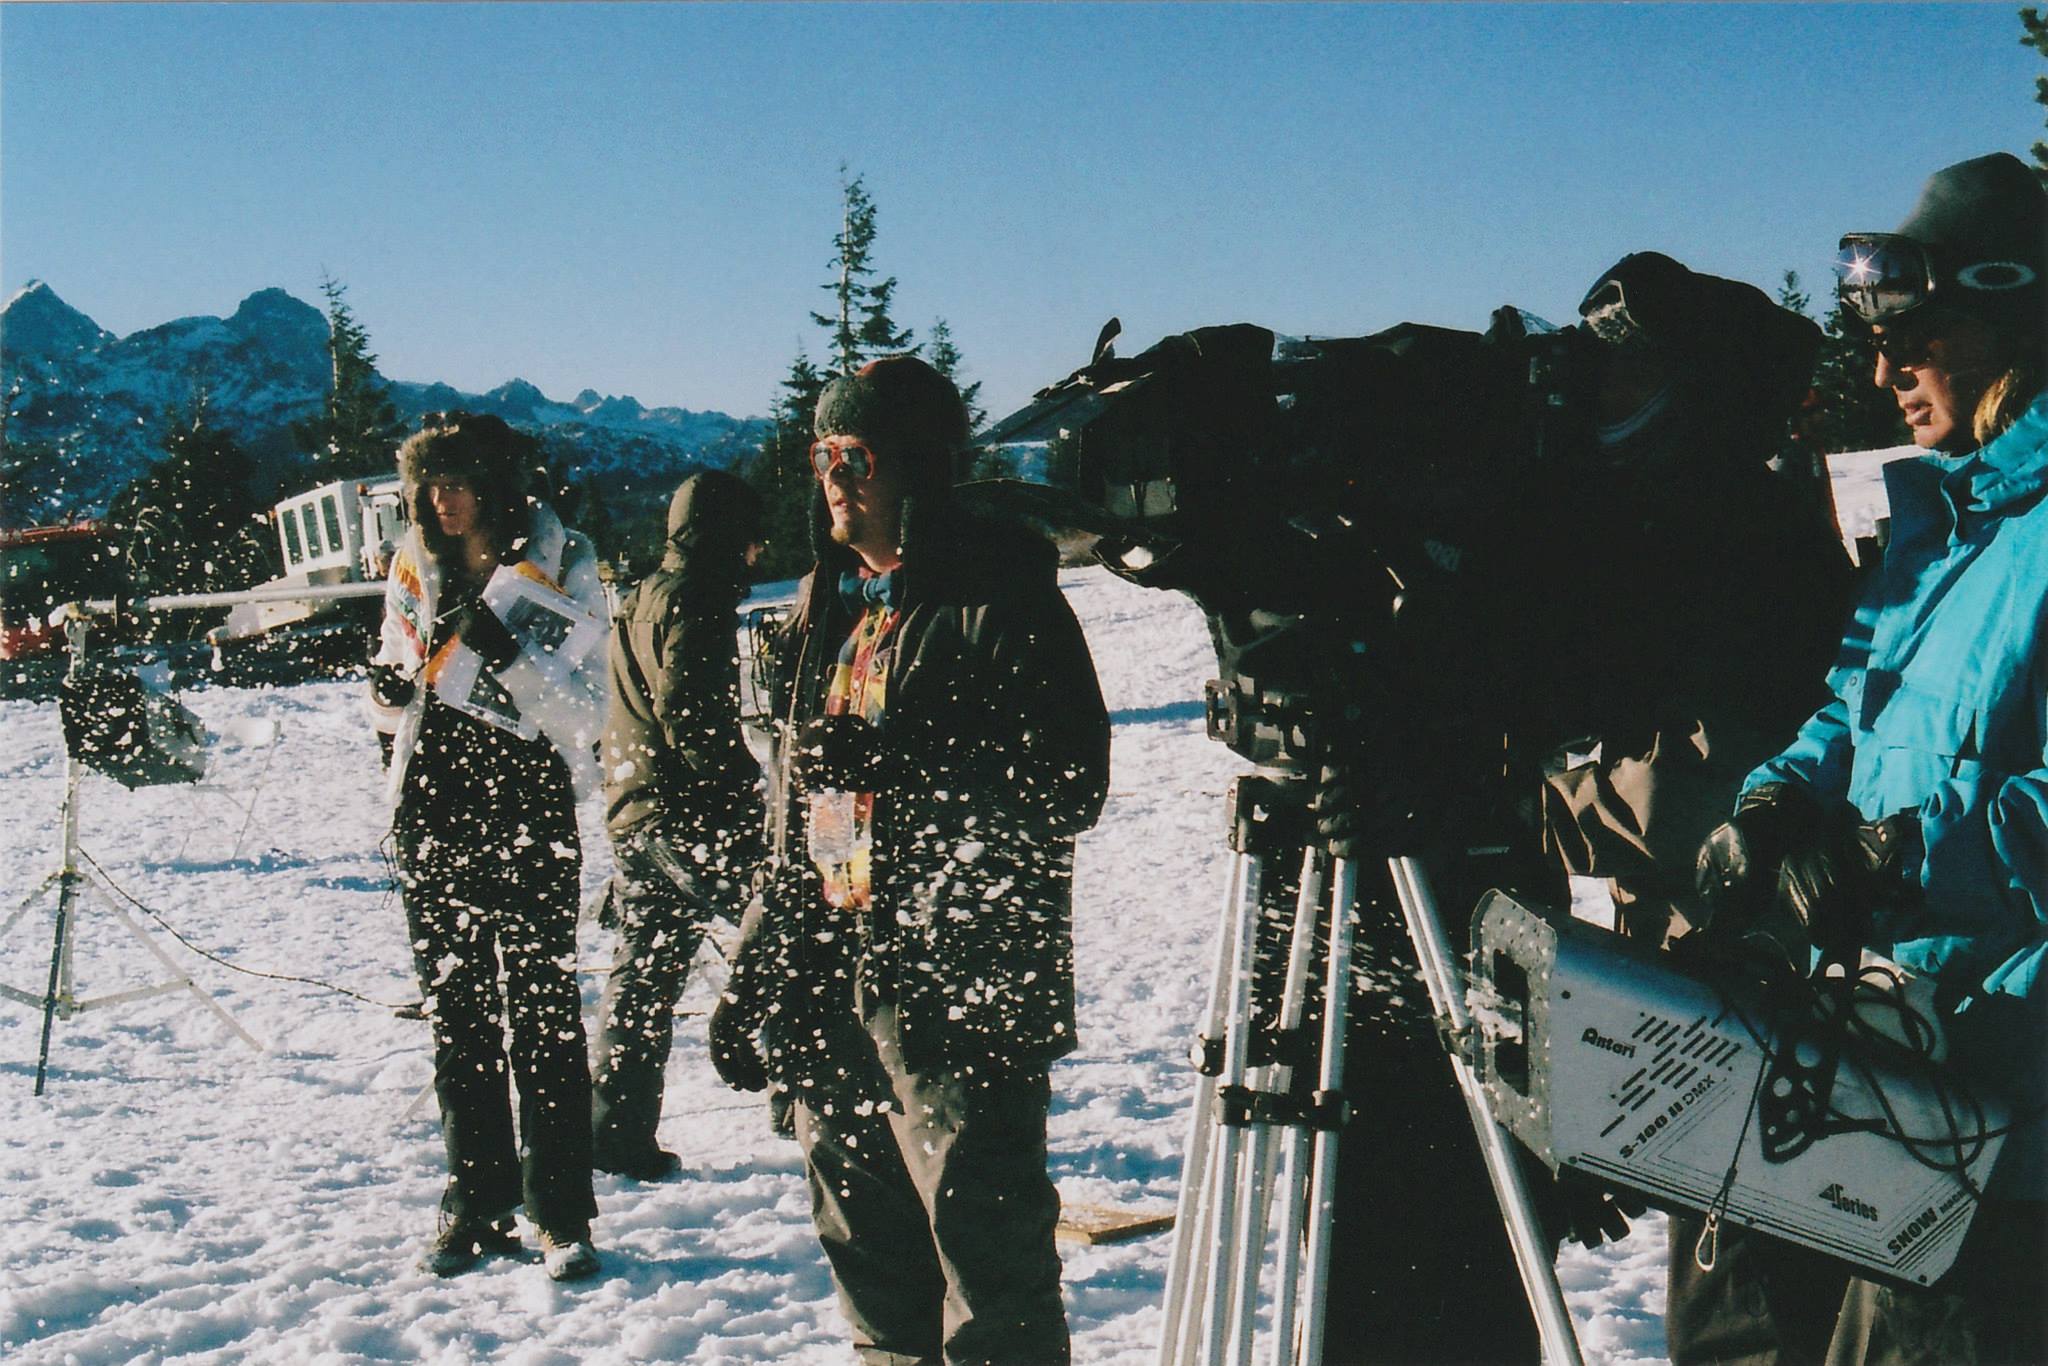 On Location - Scene One Filming, What Child Is This 1-24-15, sunrise at Ansel Adams Wilderness Area-Kurtis Anton, producing, on right on Snow Gun